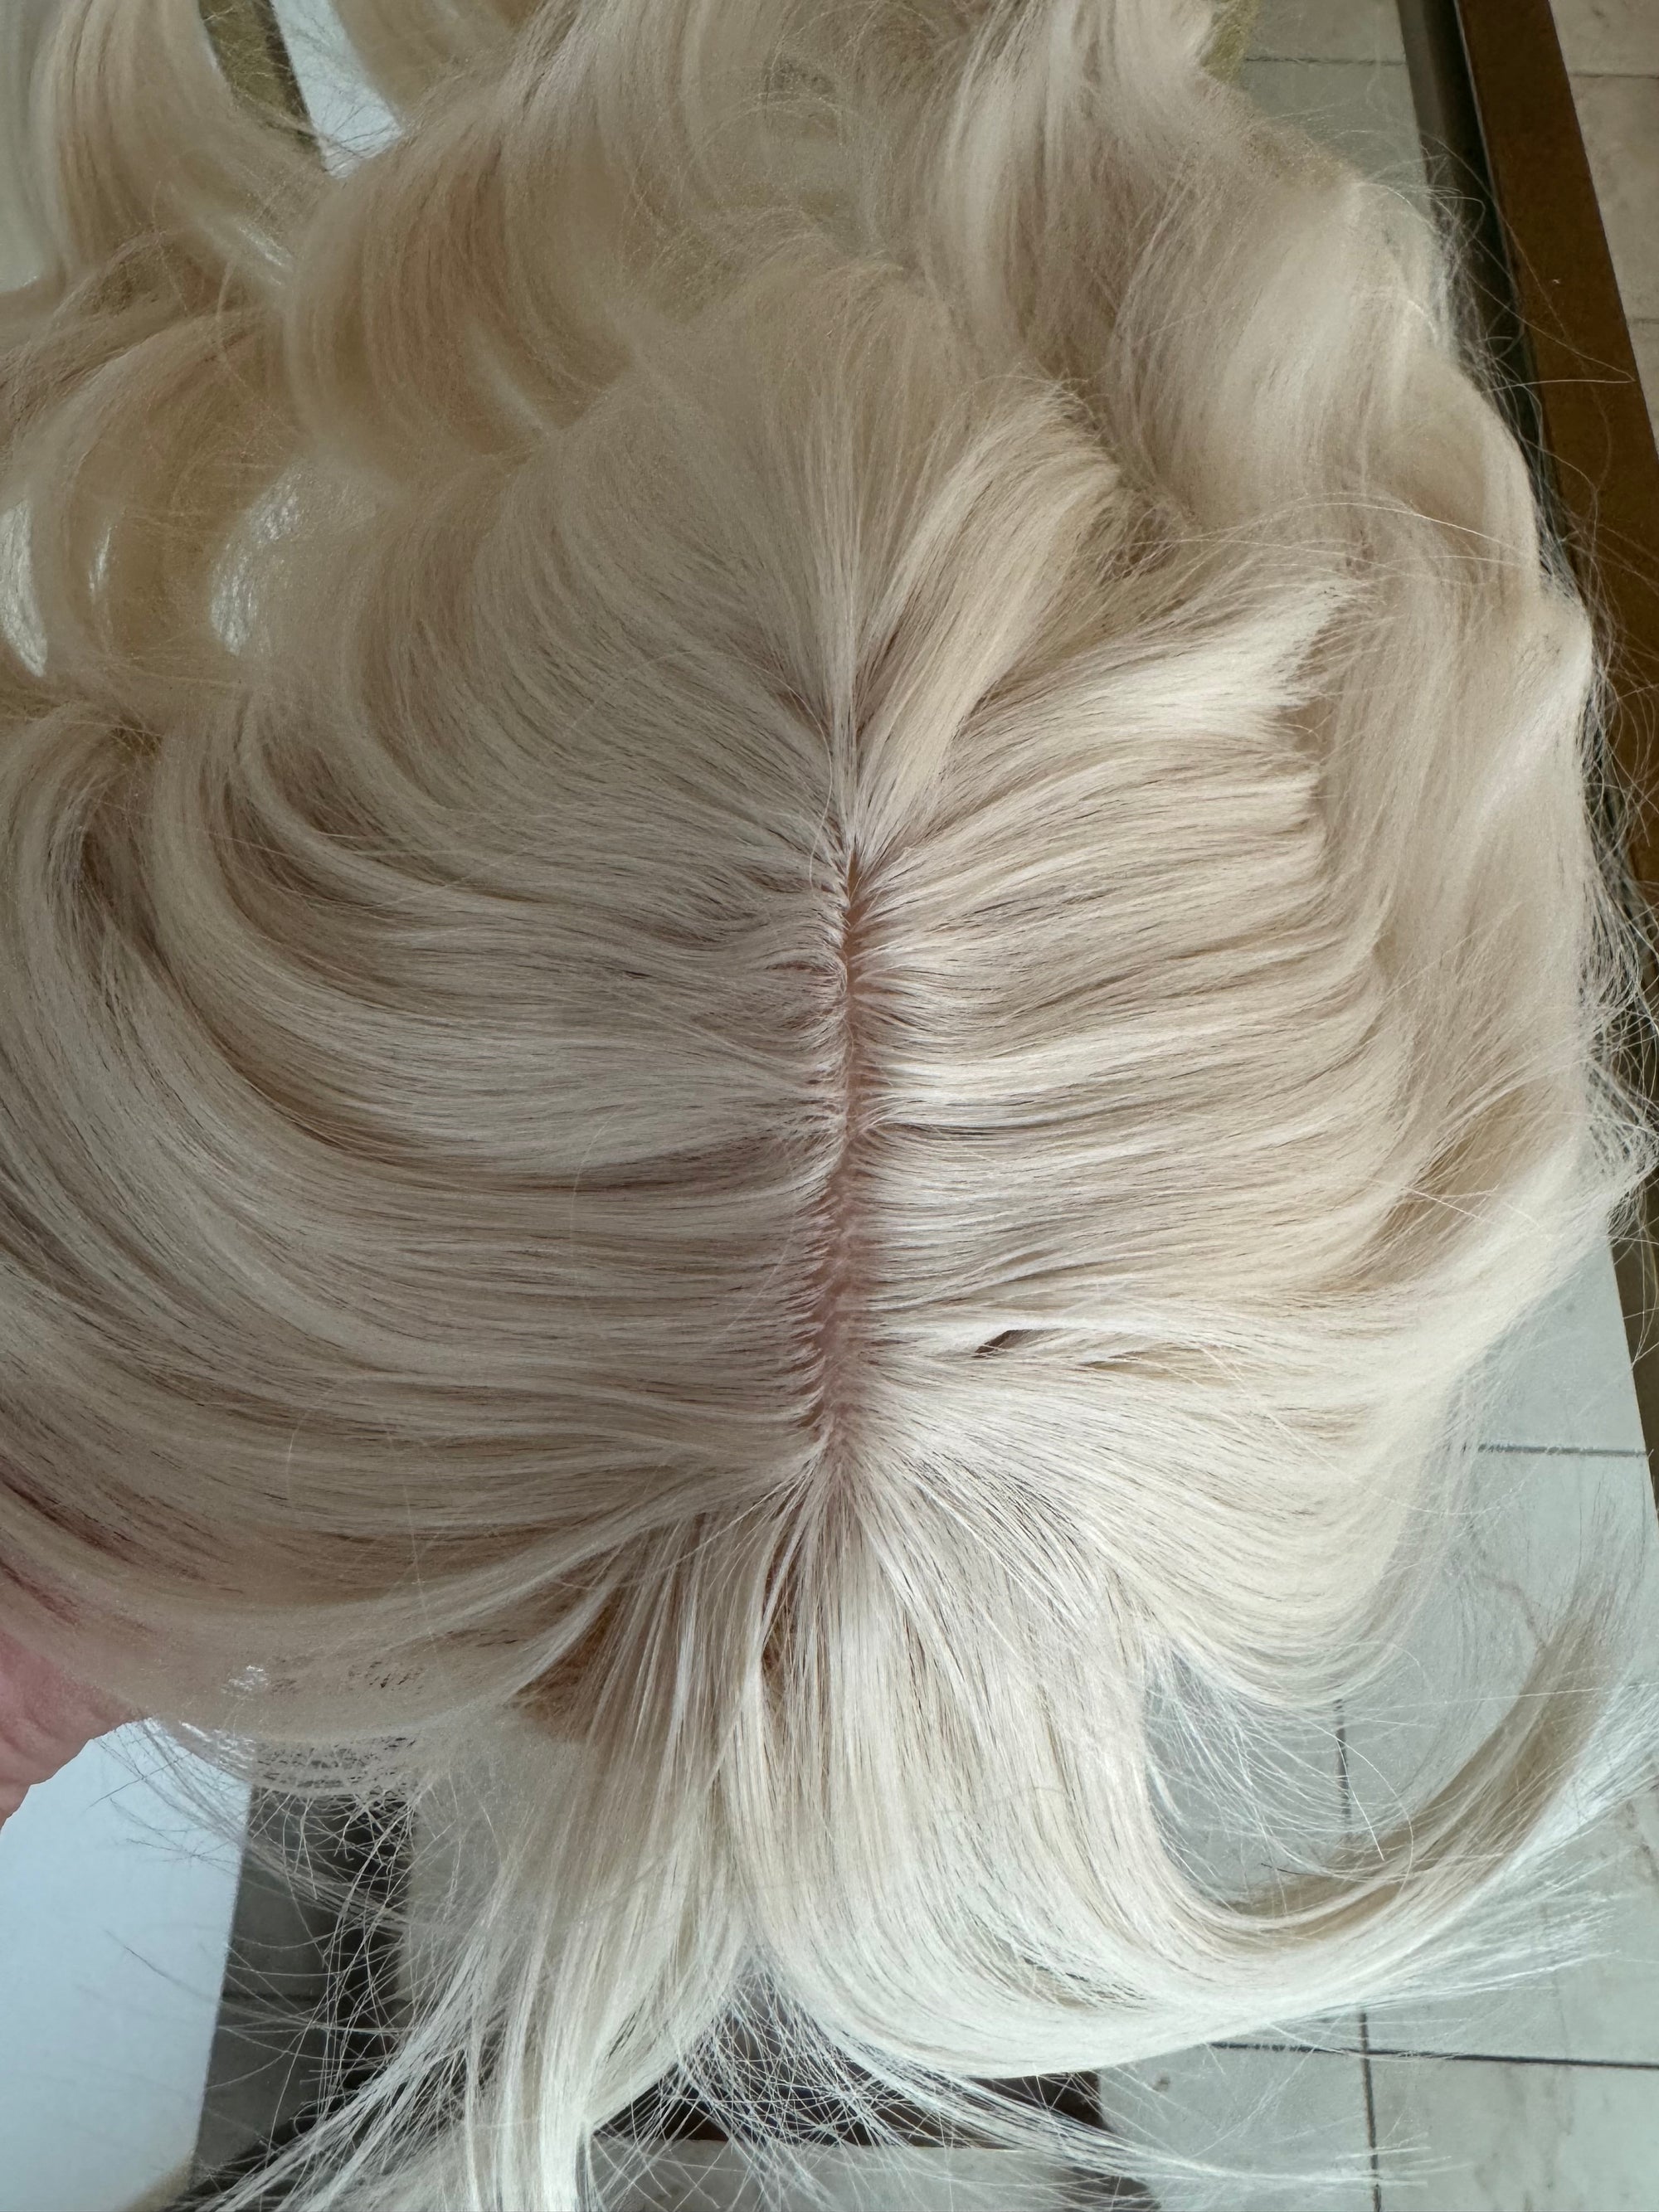 Till style  creamy white / white blonde  hair toppers for women  /bangs